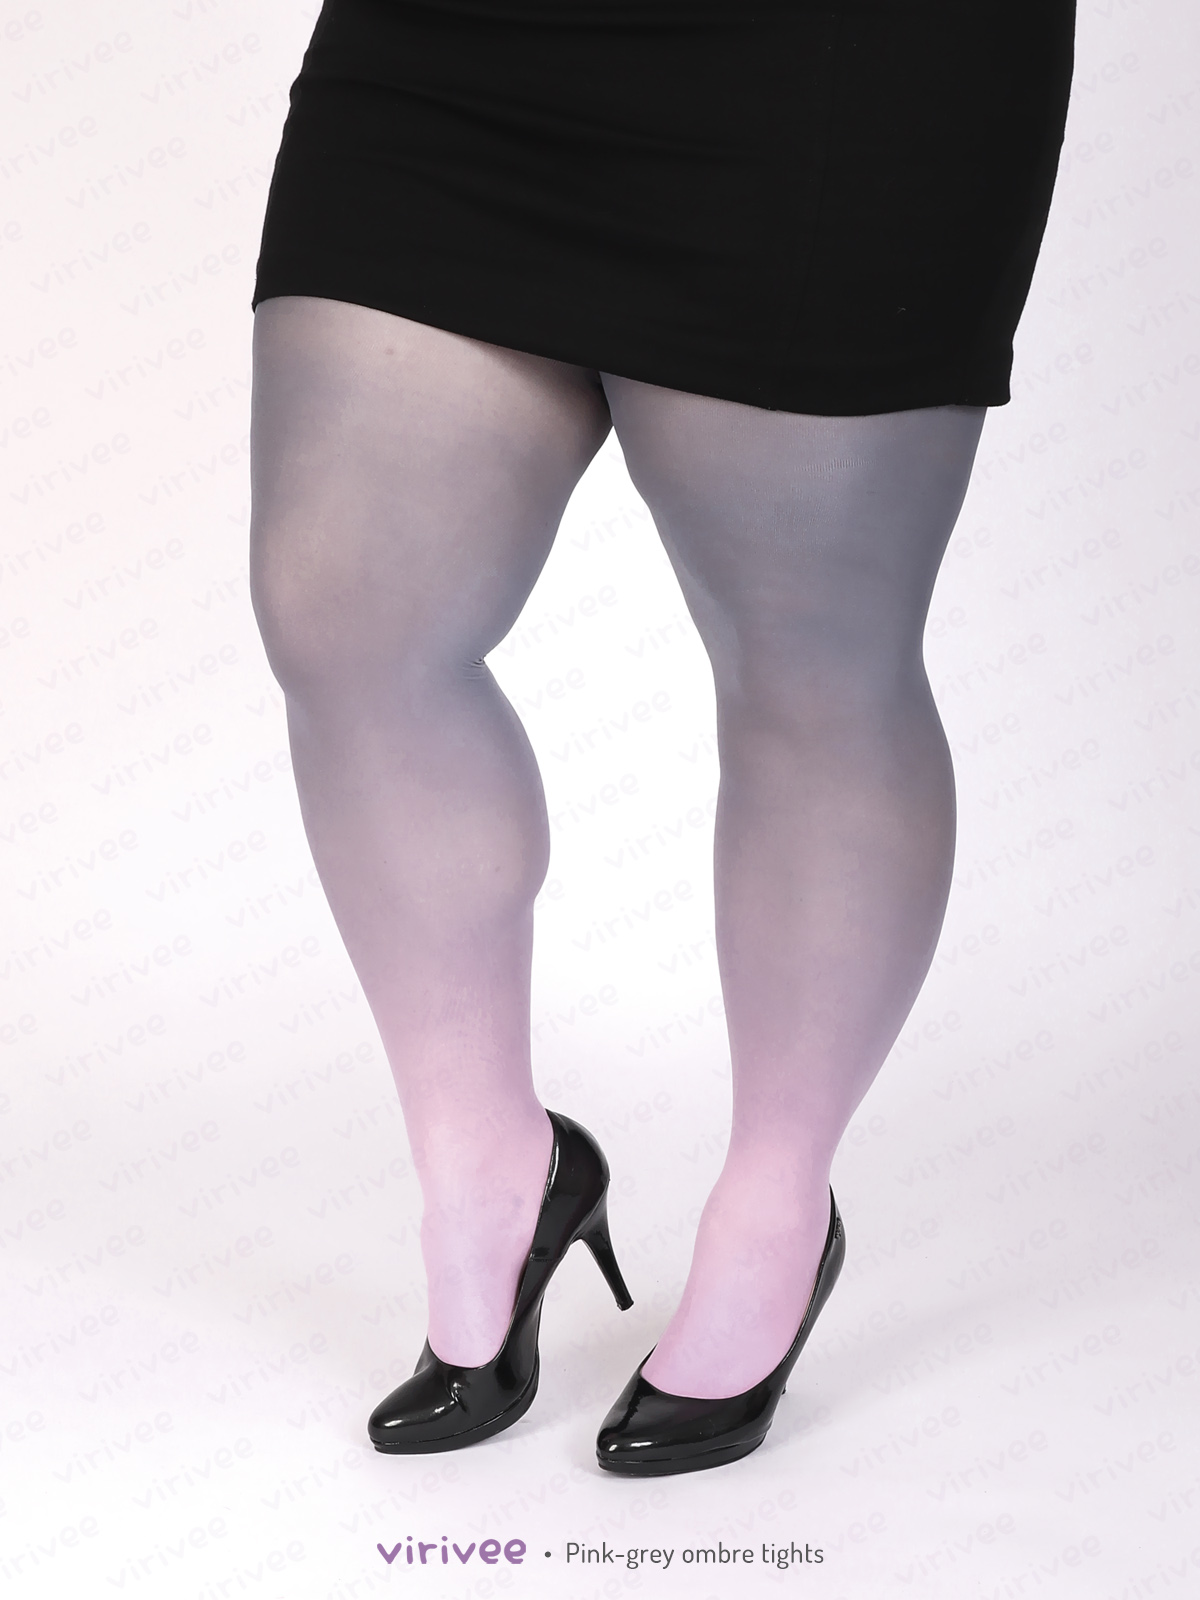 Plus size pink-grey tights